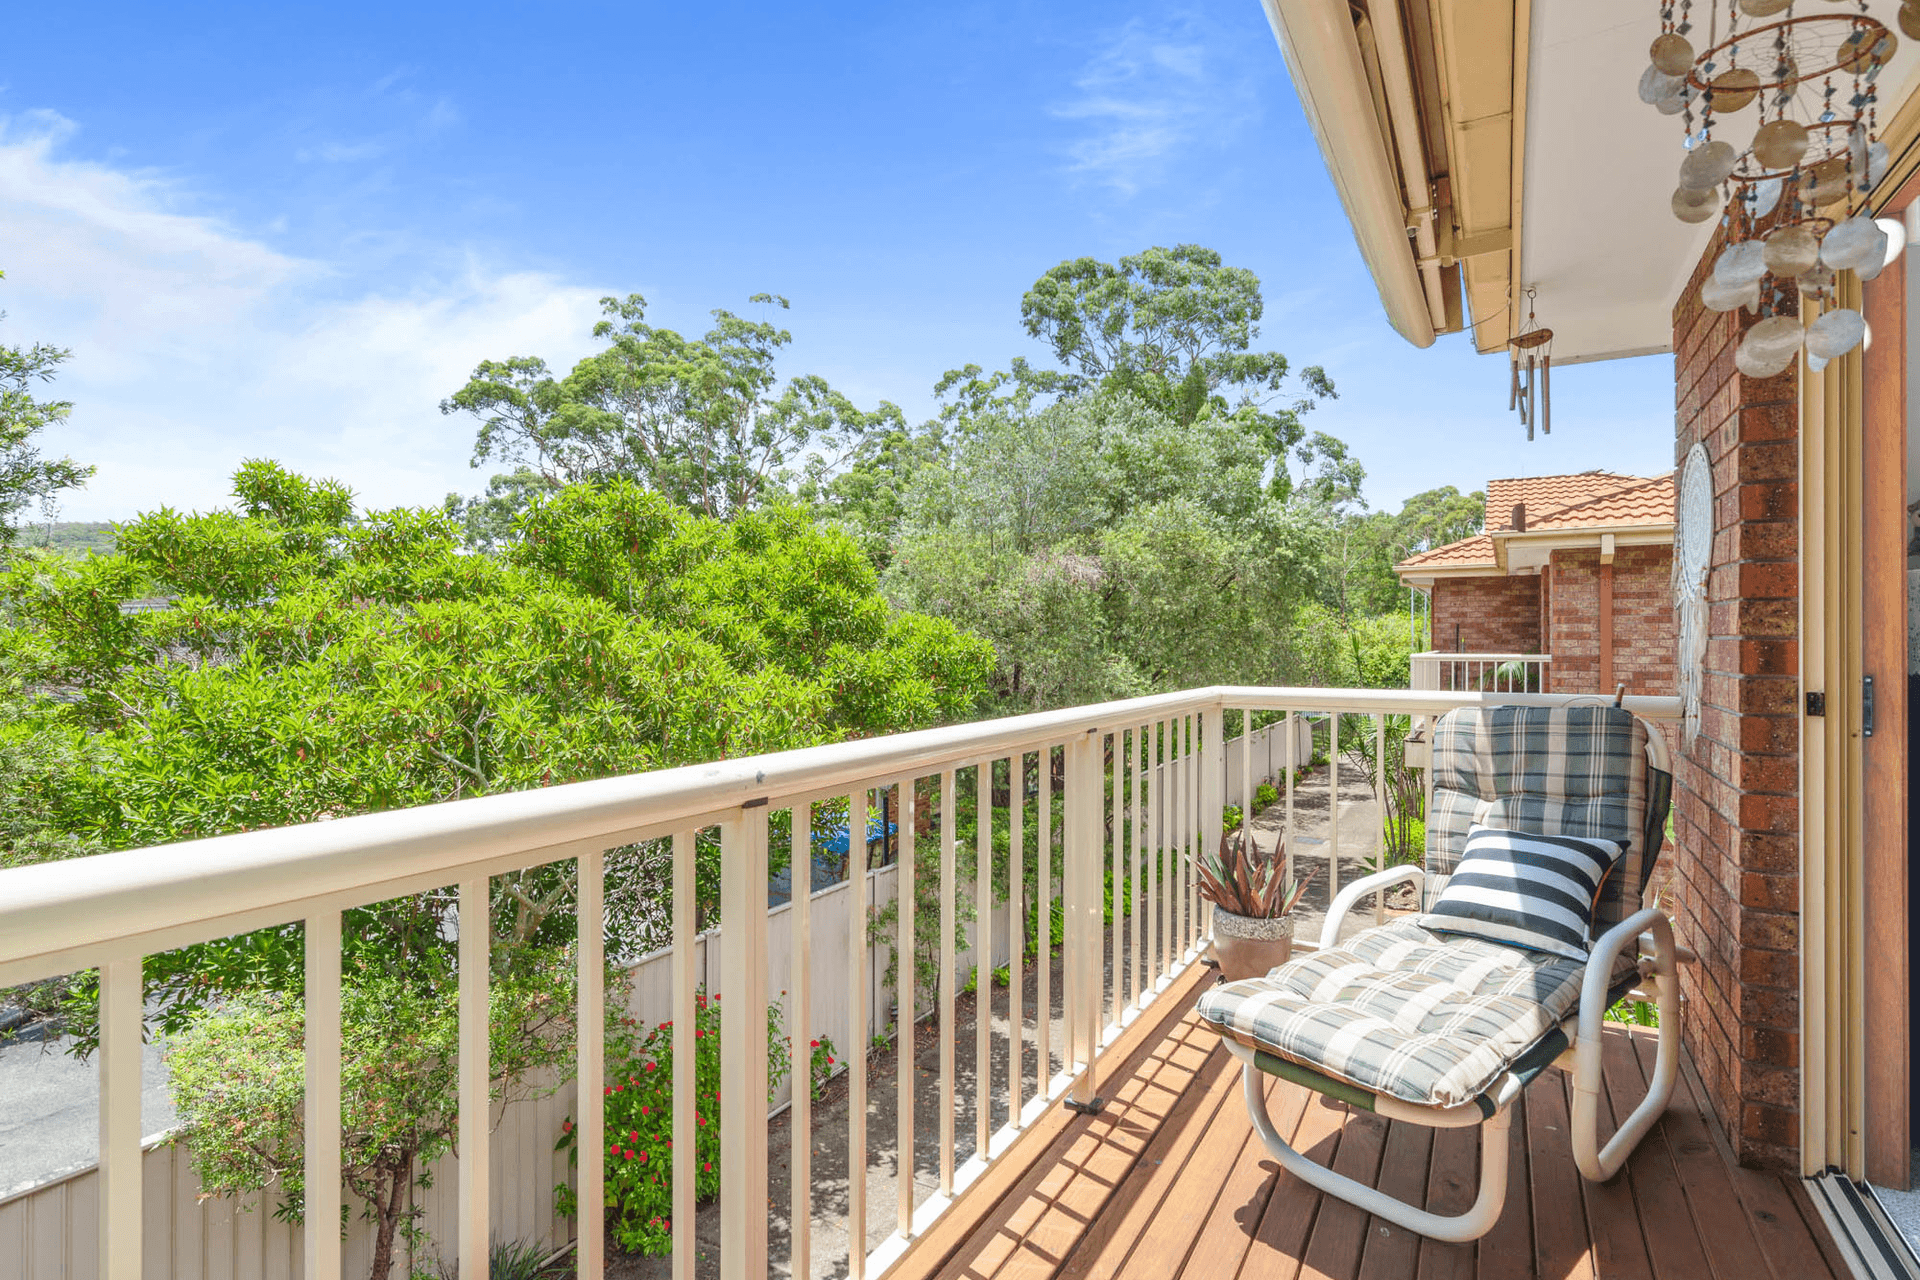 4/506 Pacific Highway, Wyoming, NSW 2250